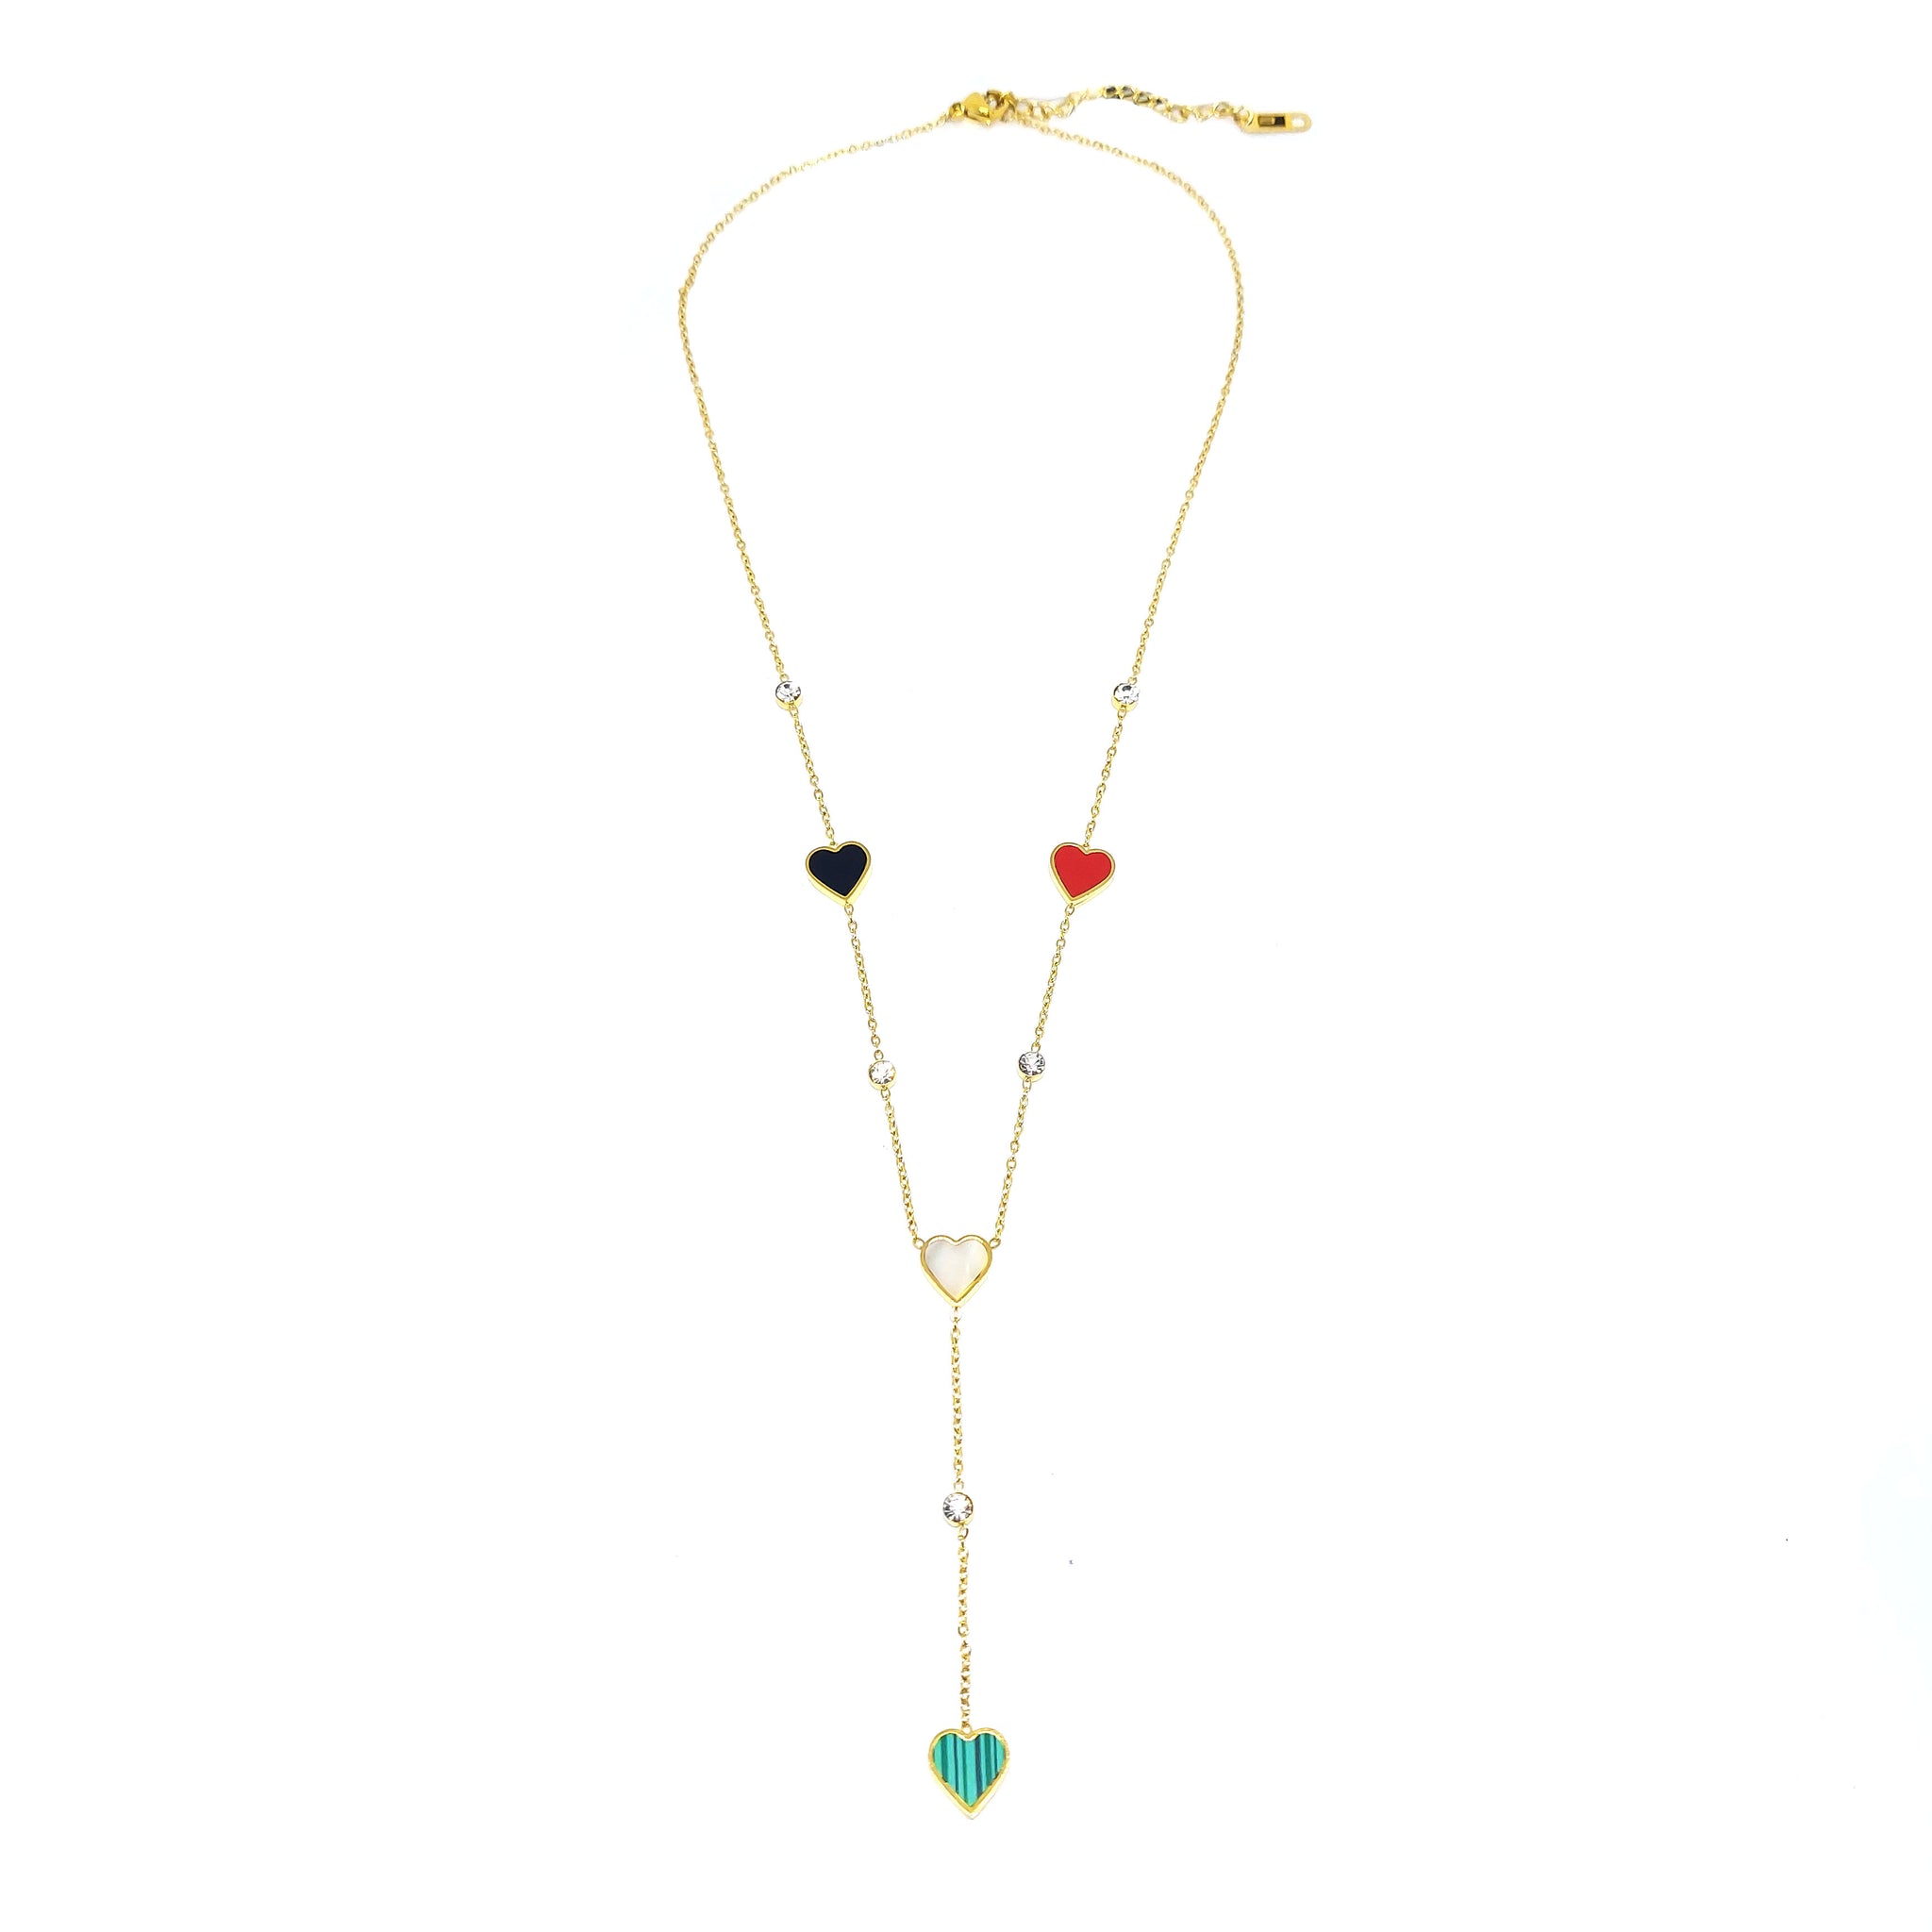 ESN 7833: All IPG Multi-Color Heart & Cz Double Necklace